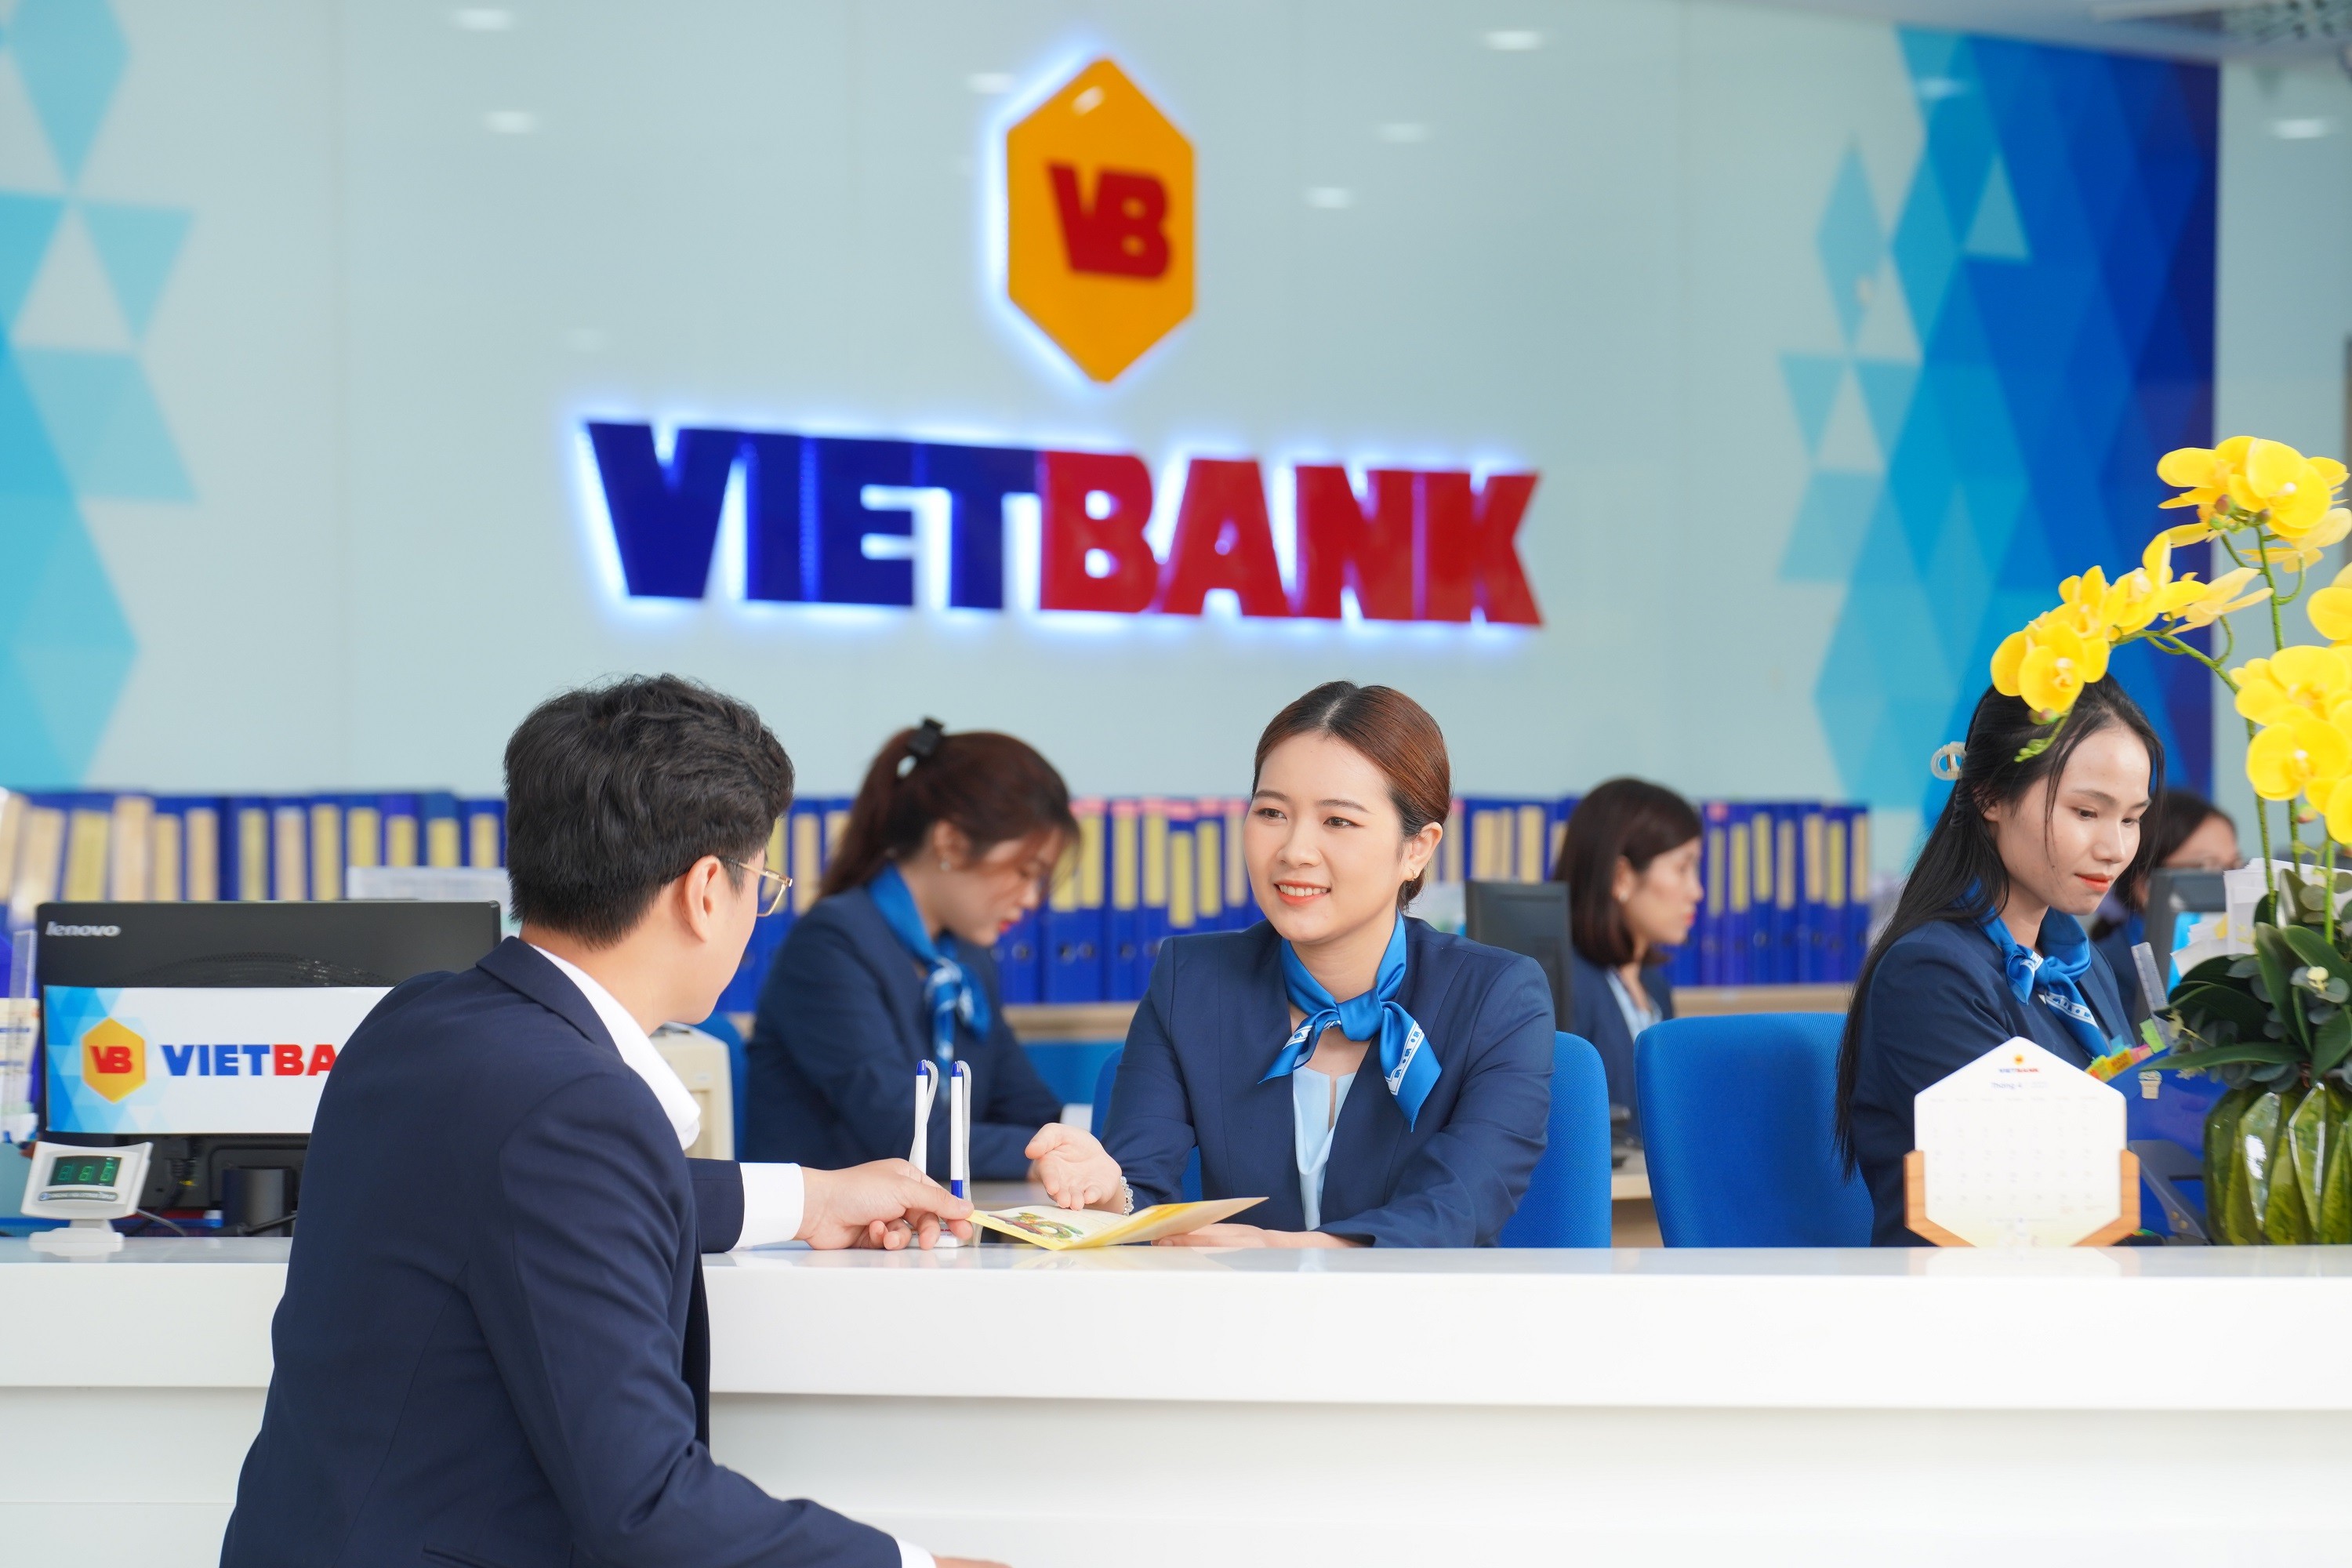 2-vietbank-canh-giao-dich-1682391499.JPG